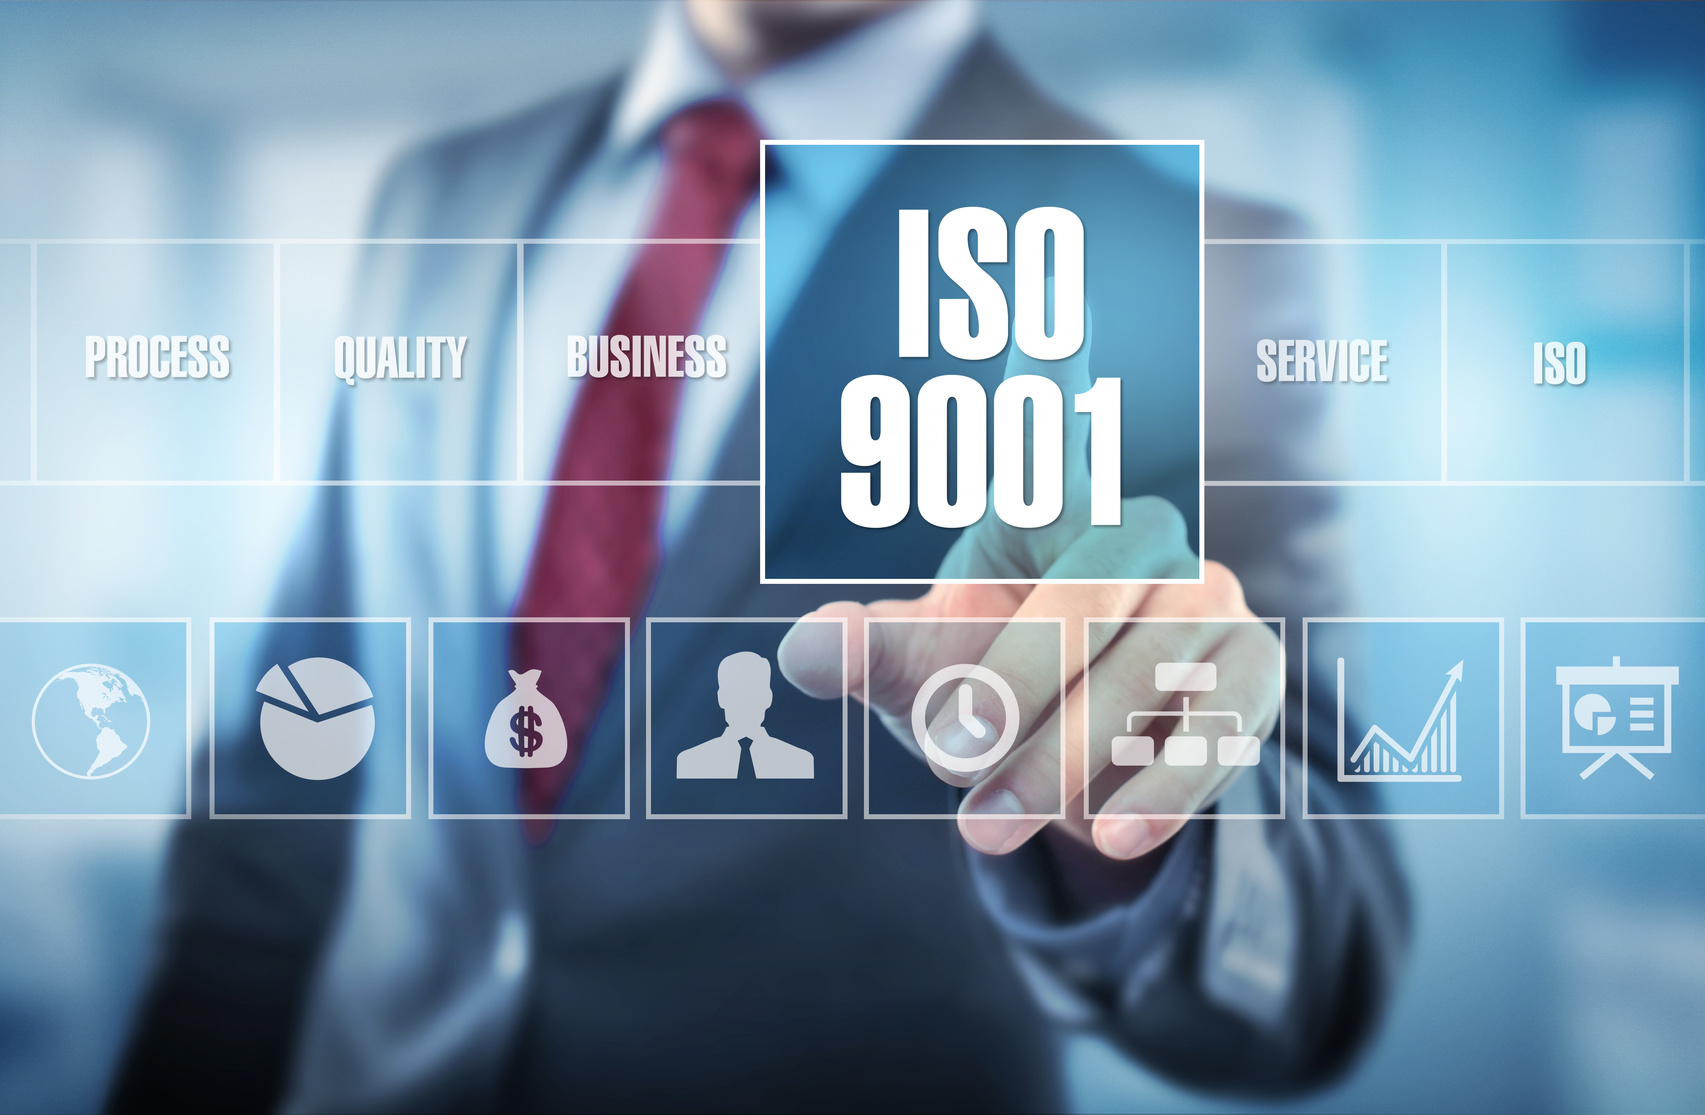 iso-9001-1